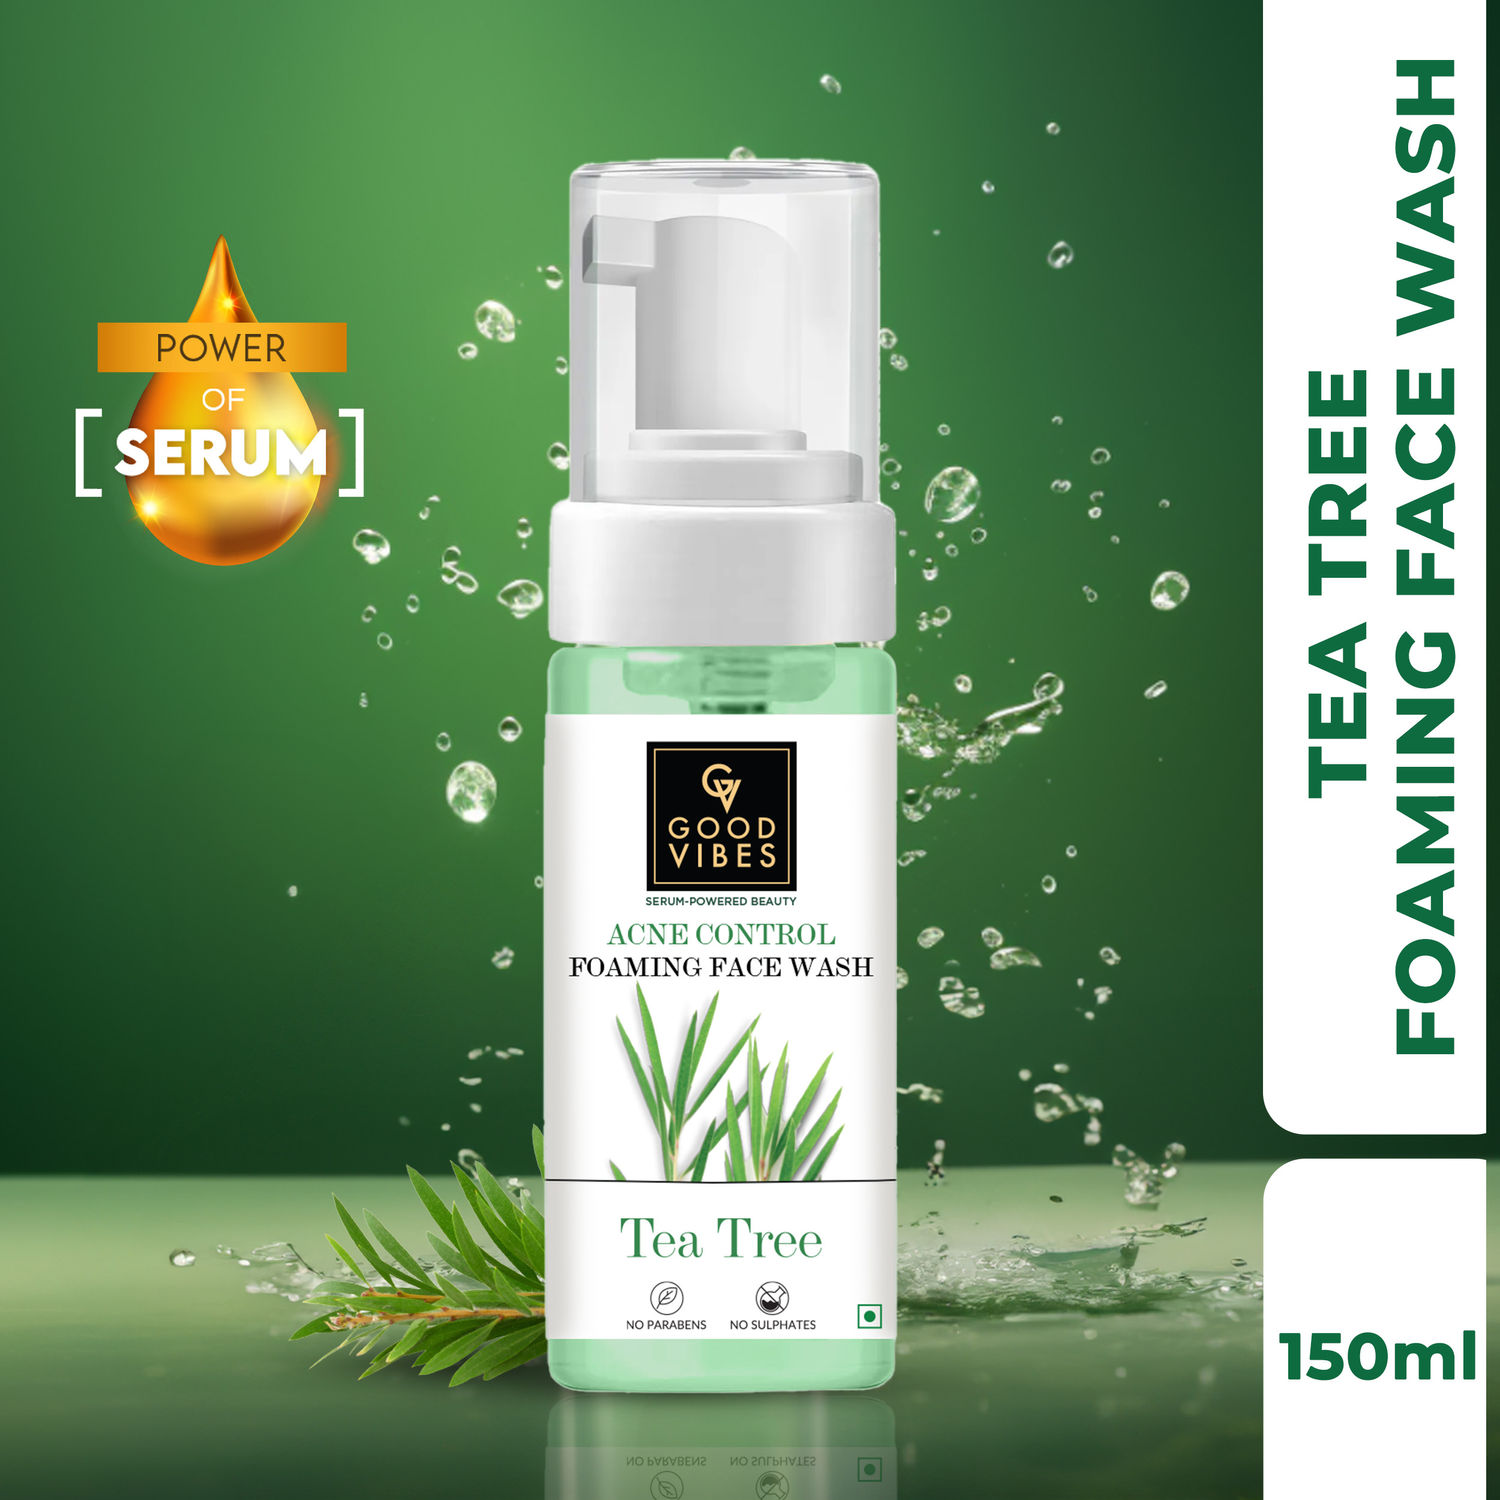 Buy Good Vibes Acne Control Tea Tree Foaming Face Wash with Power of Serum (150 ml) - Purplle